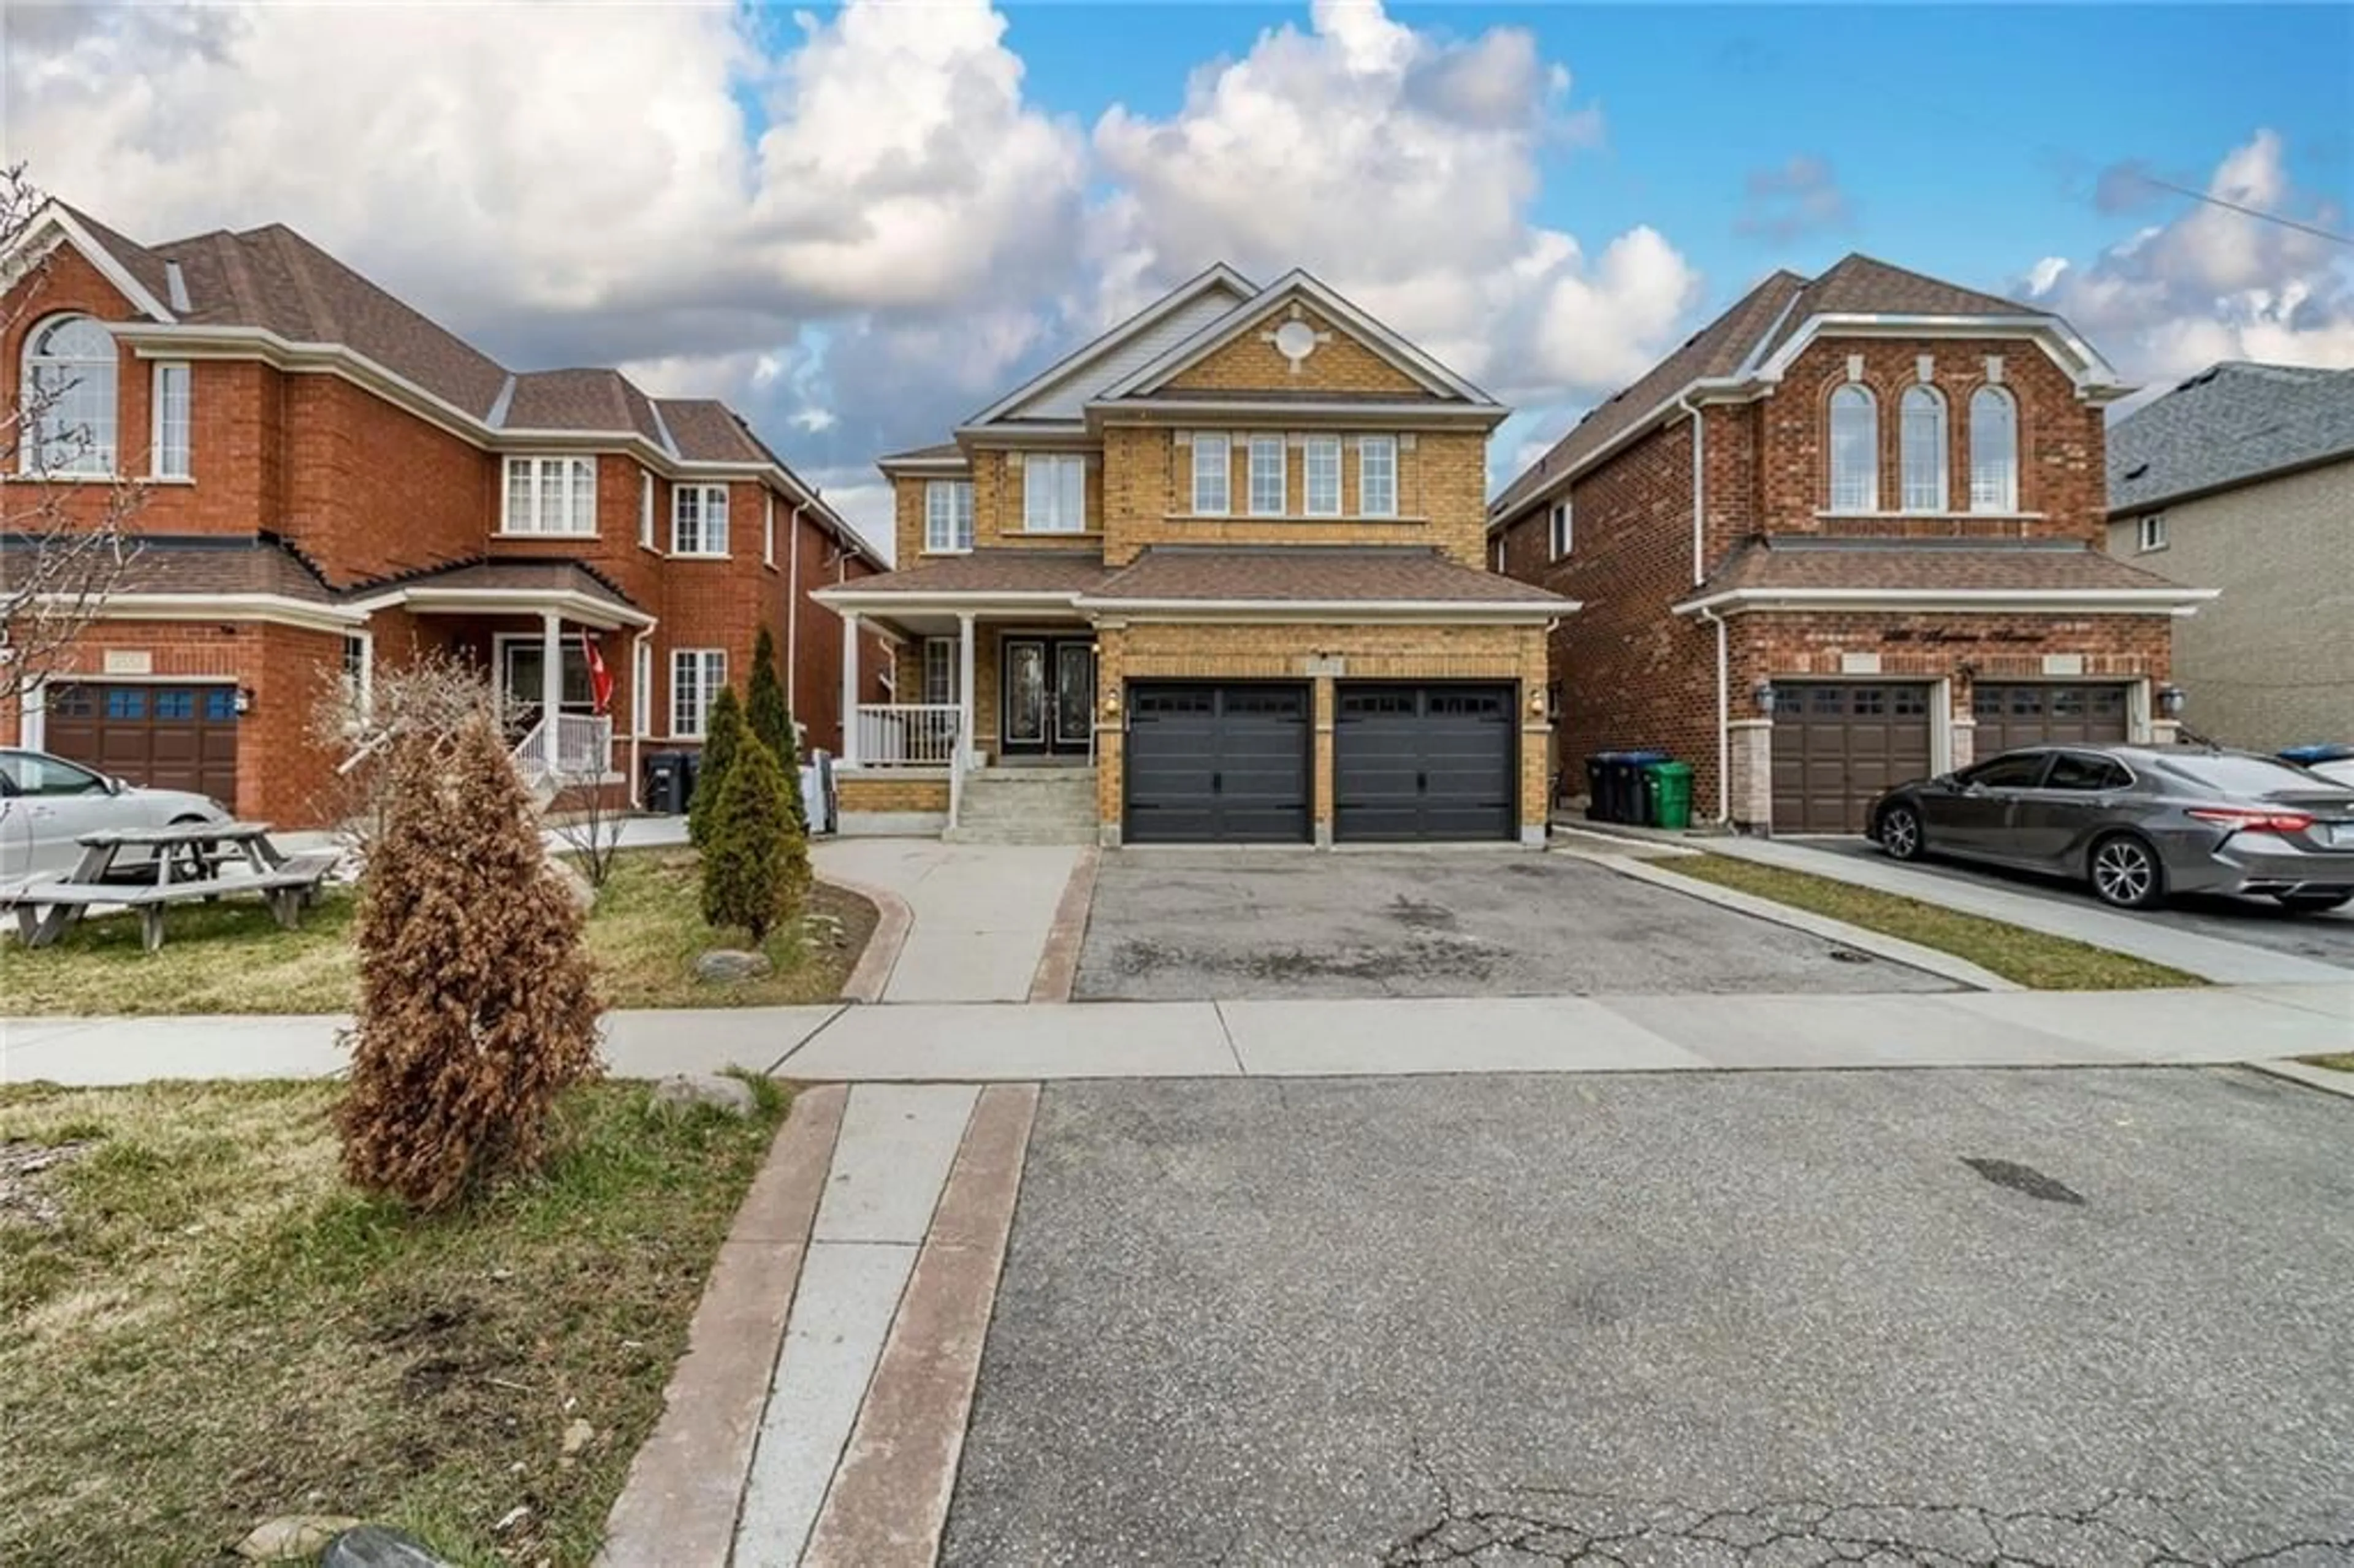 Frontside or backside of a home for 3562 Aquinas Ave, Mississauga Ontario L5M 7L7